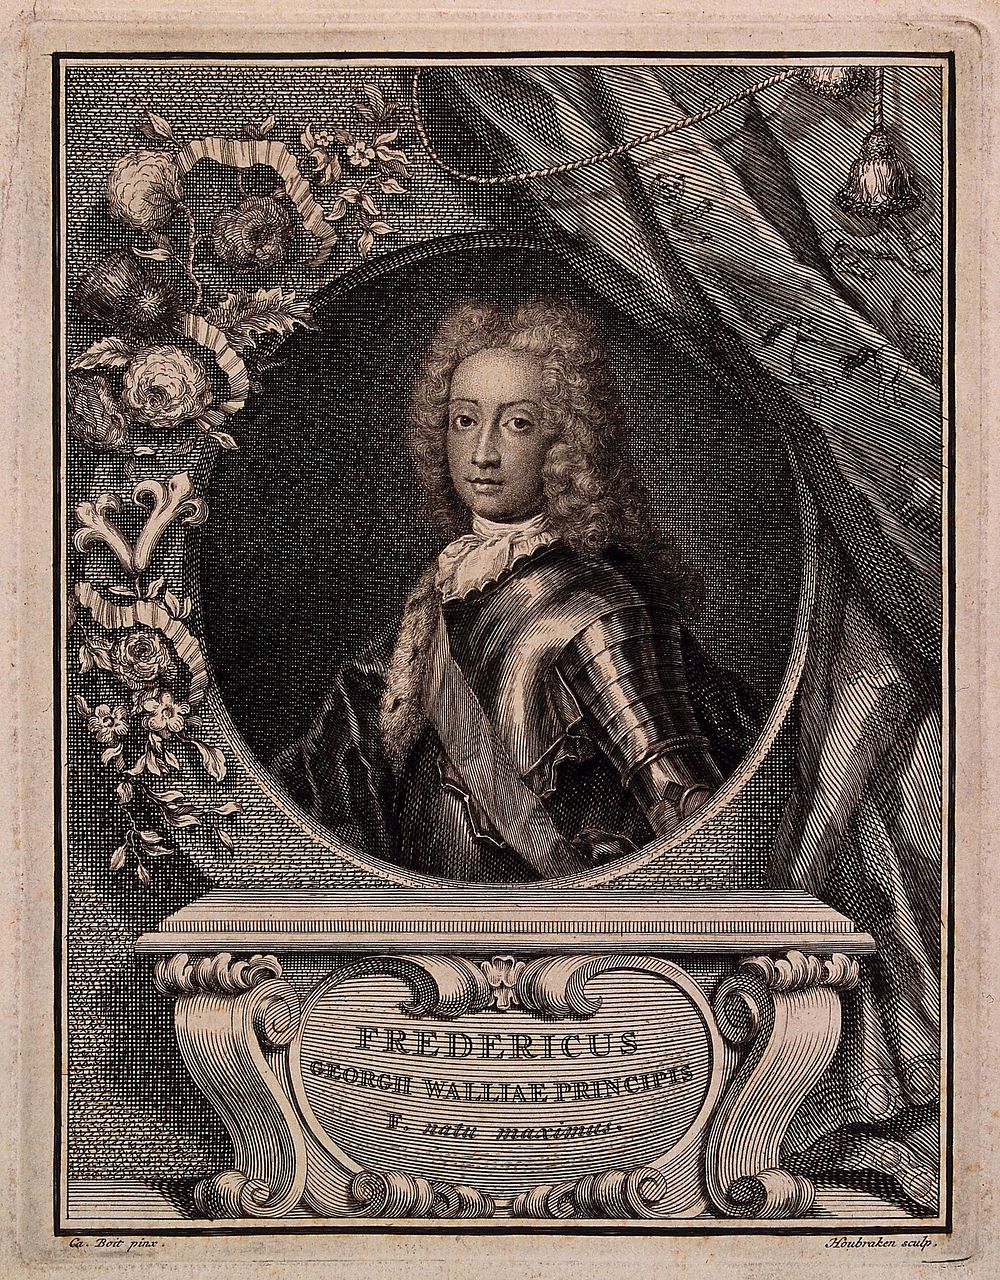 Frederick Prince of Wales. Engraving by J. Houbraken after C. Boit, ca. 1727.